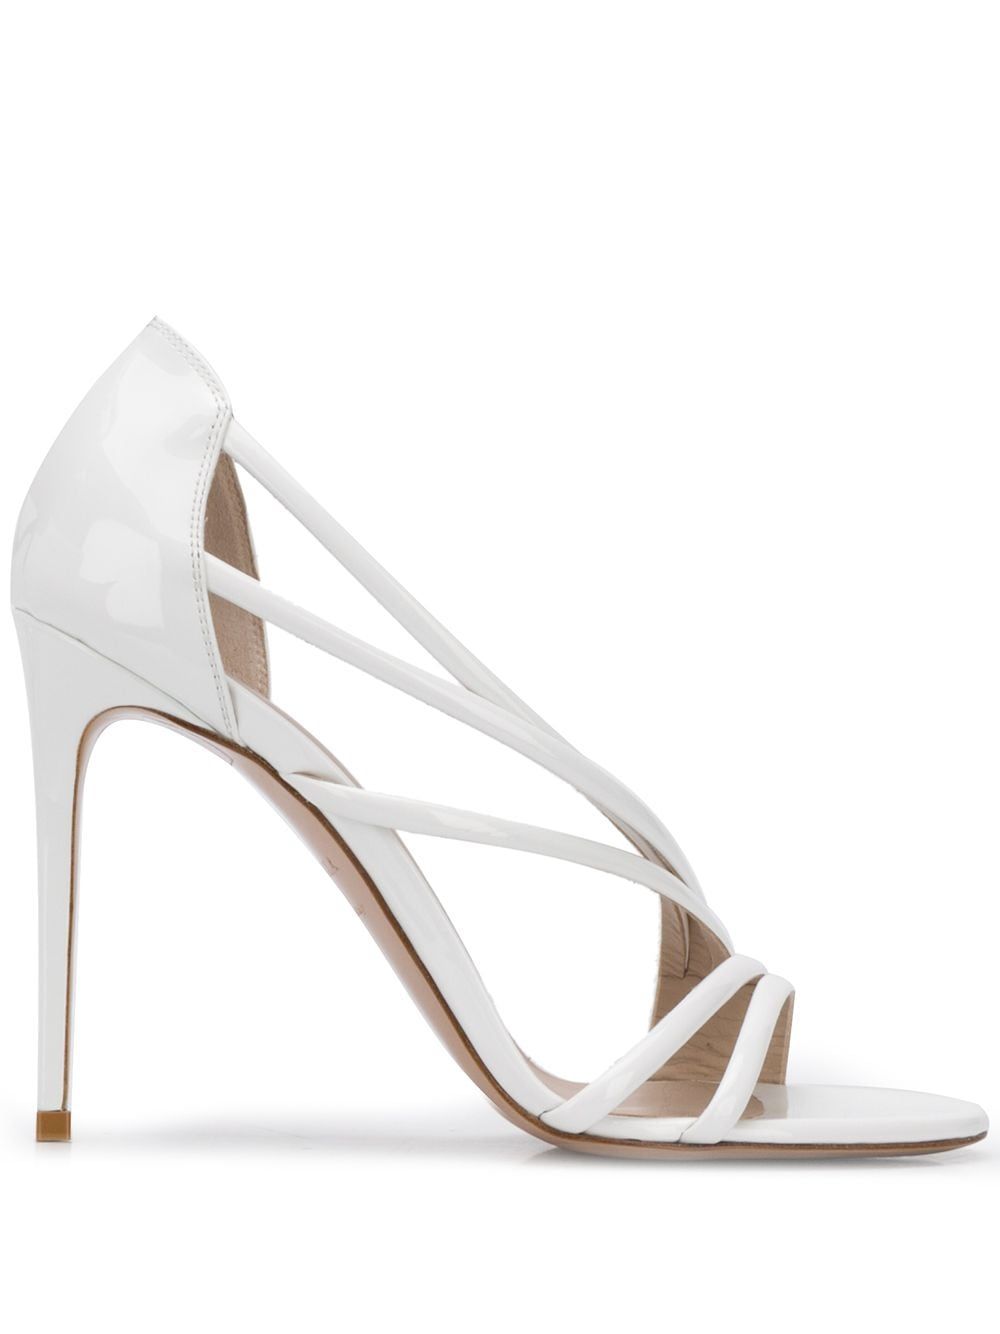 74 Best Wedding Shoes of 2020 